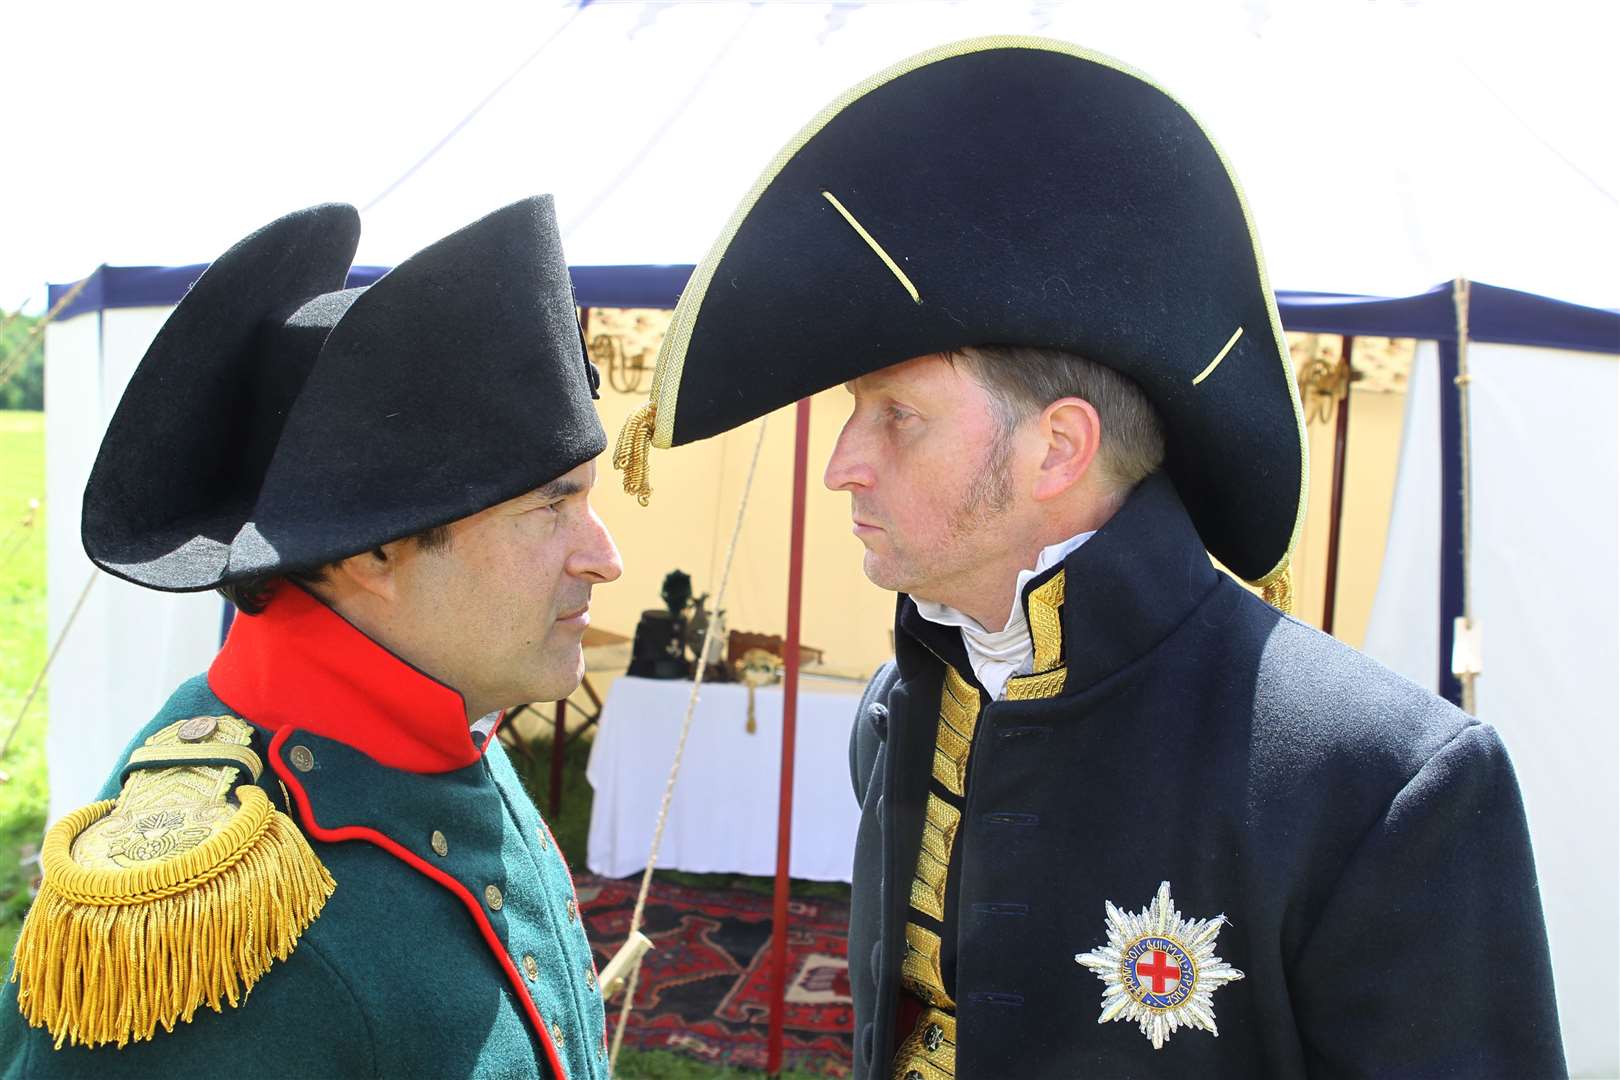 Napoleon (John Horwood) and the Duke of Wellington (Heathcliff Pye) square up to each other during a re-enactment of the Battle of Waterloo at Hunton Court